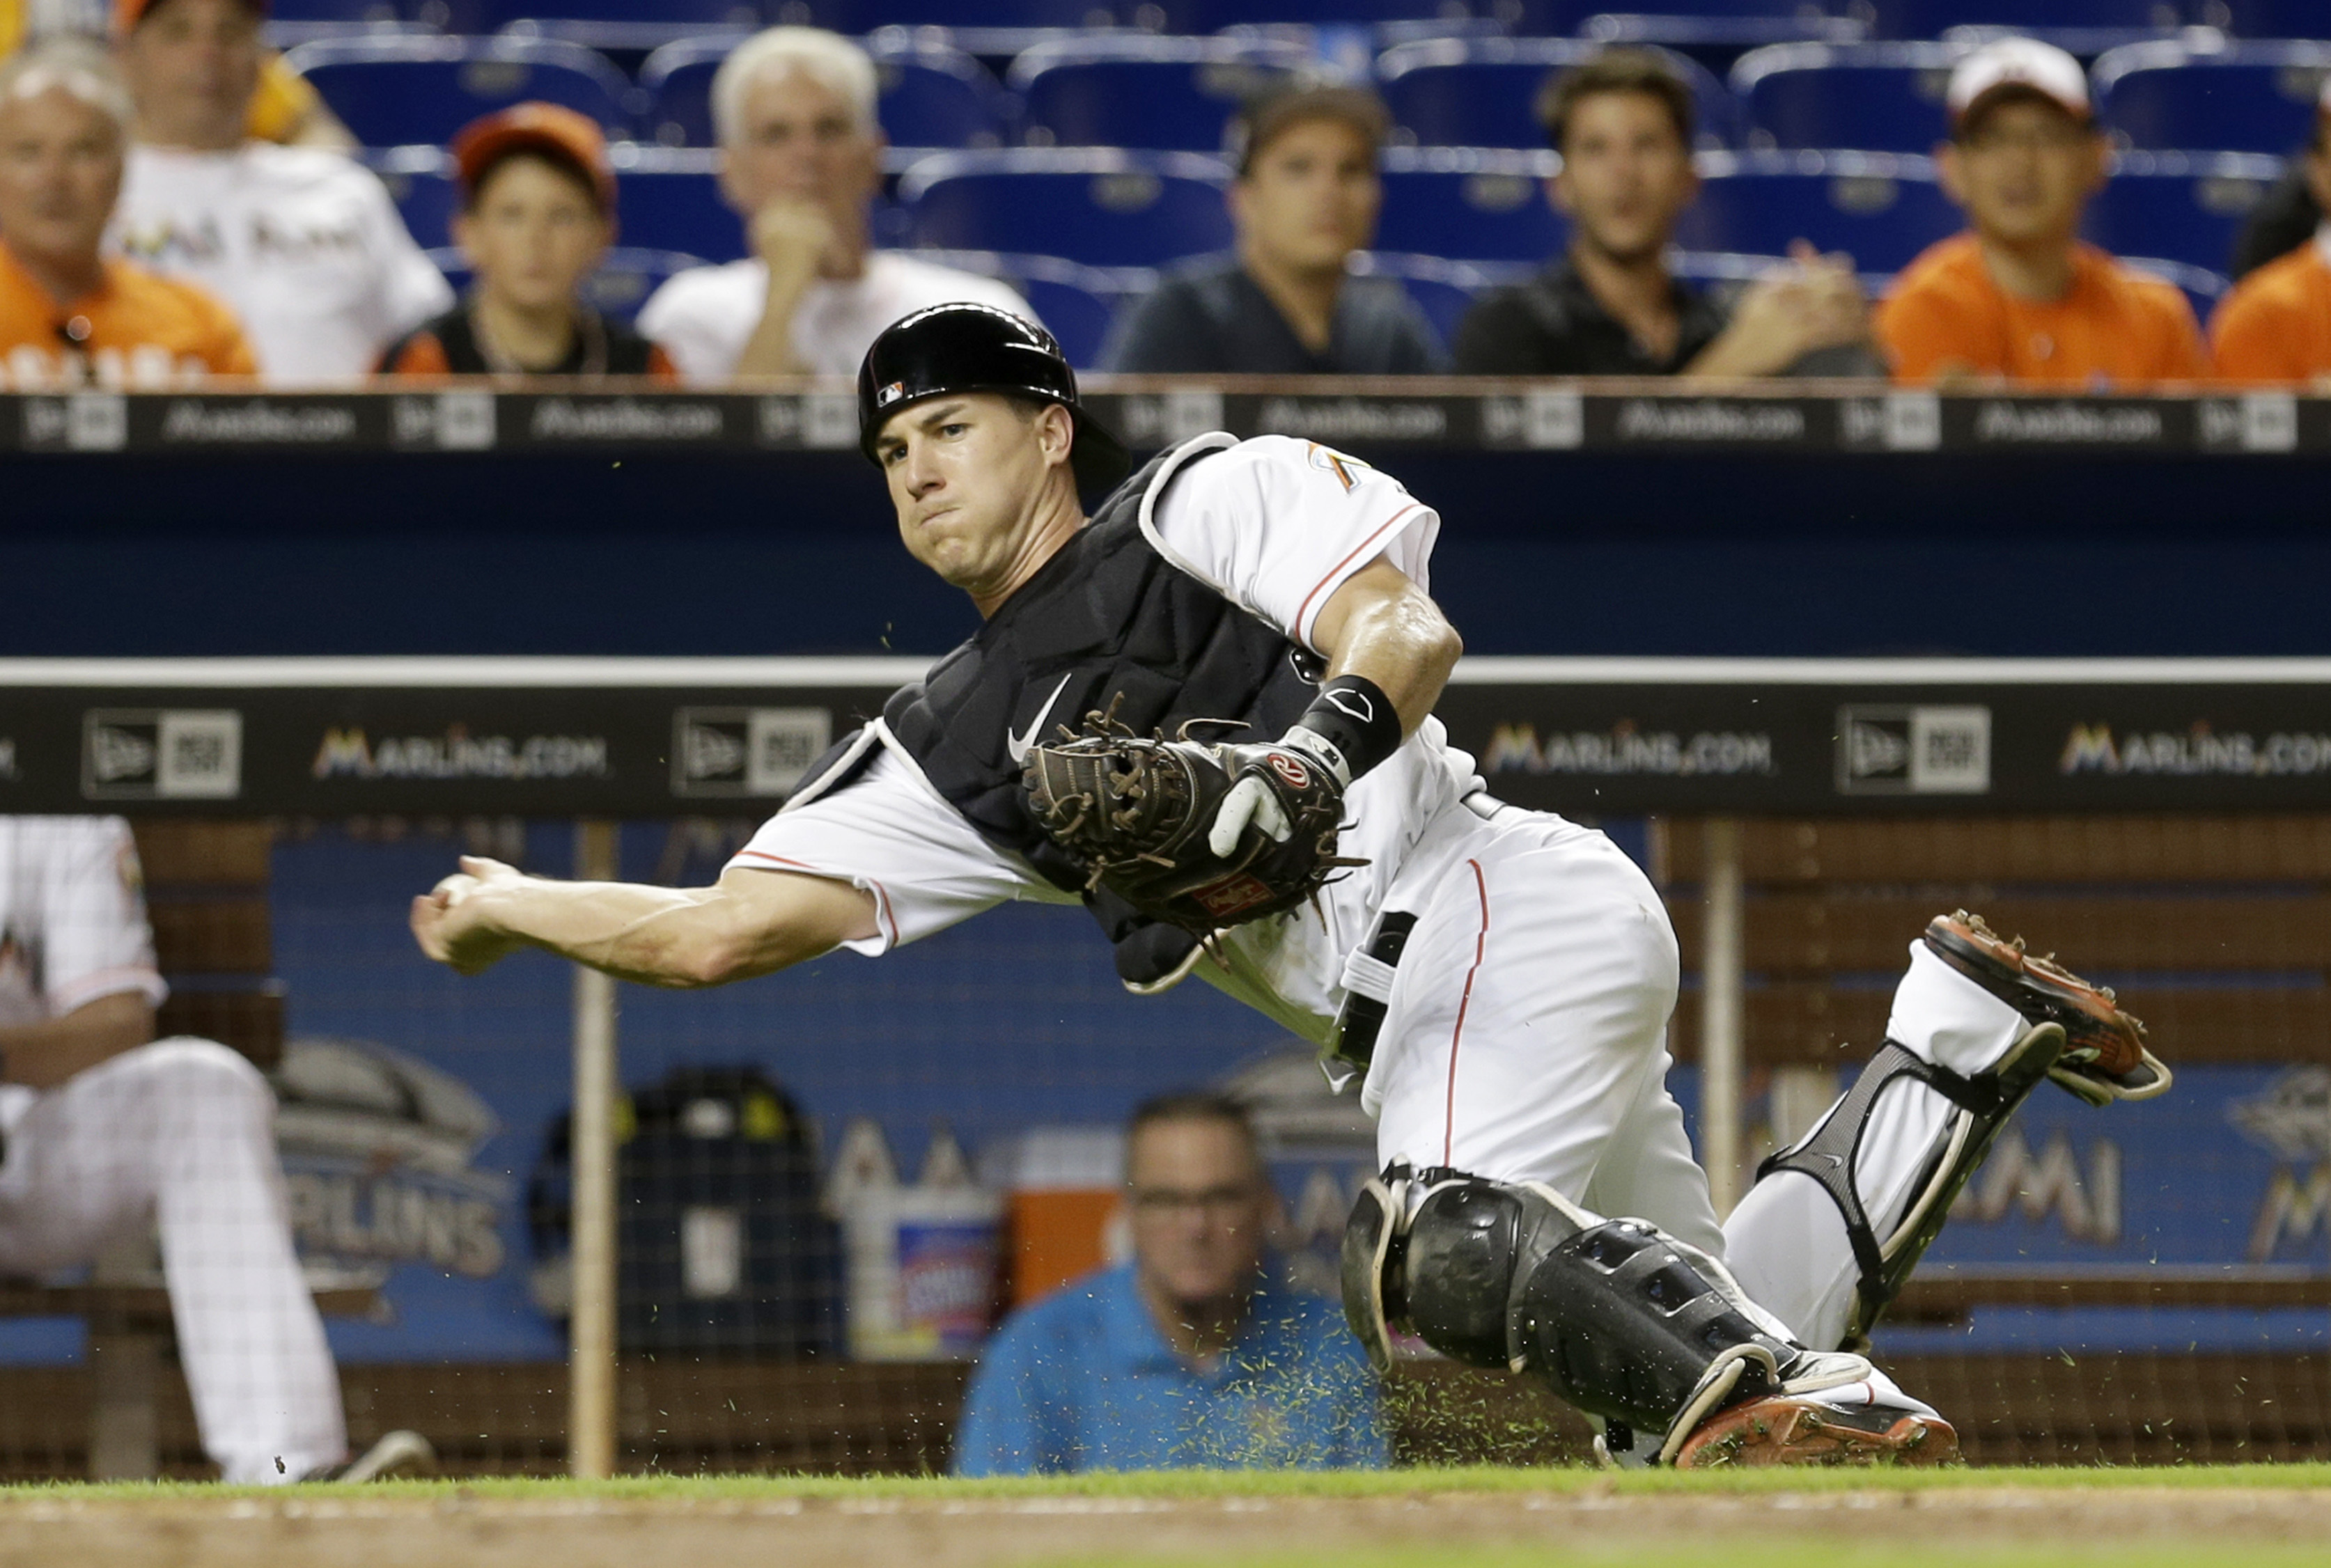 Inside the Marlins: J.T. Realmuto' web extra